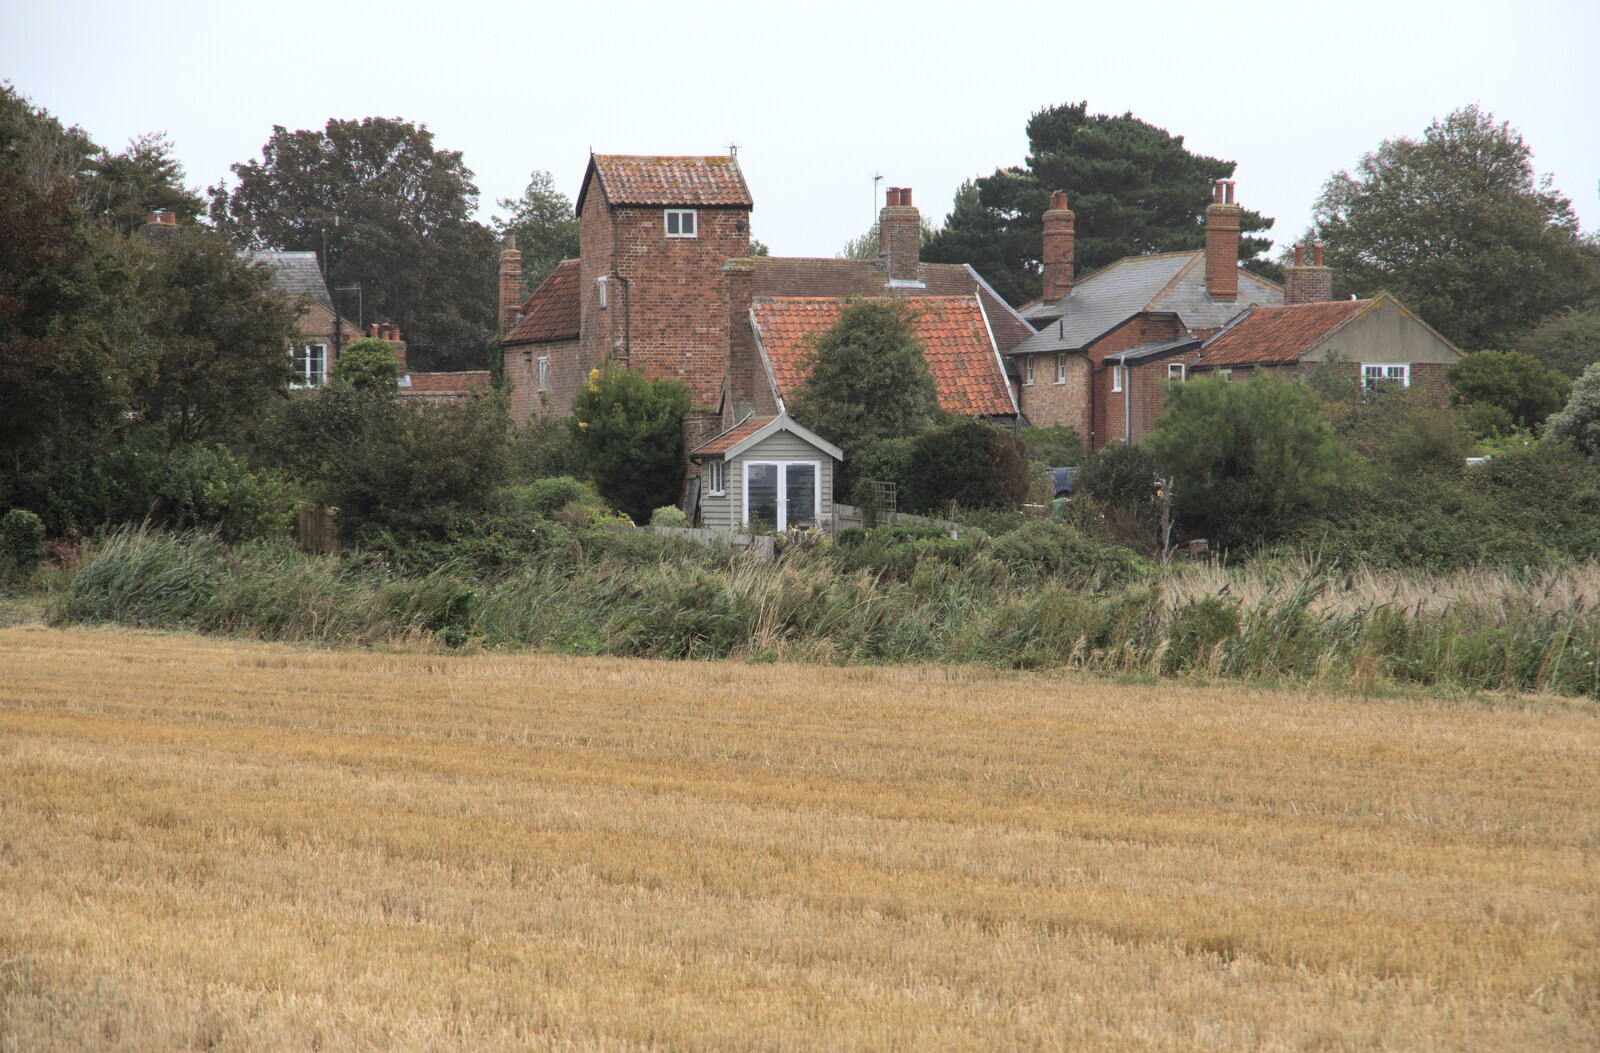 A mixed collection of houses from A Trip to Orford, Suffolk - 29th August 2020